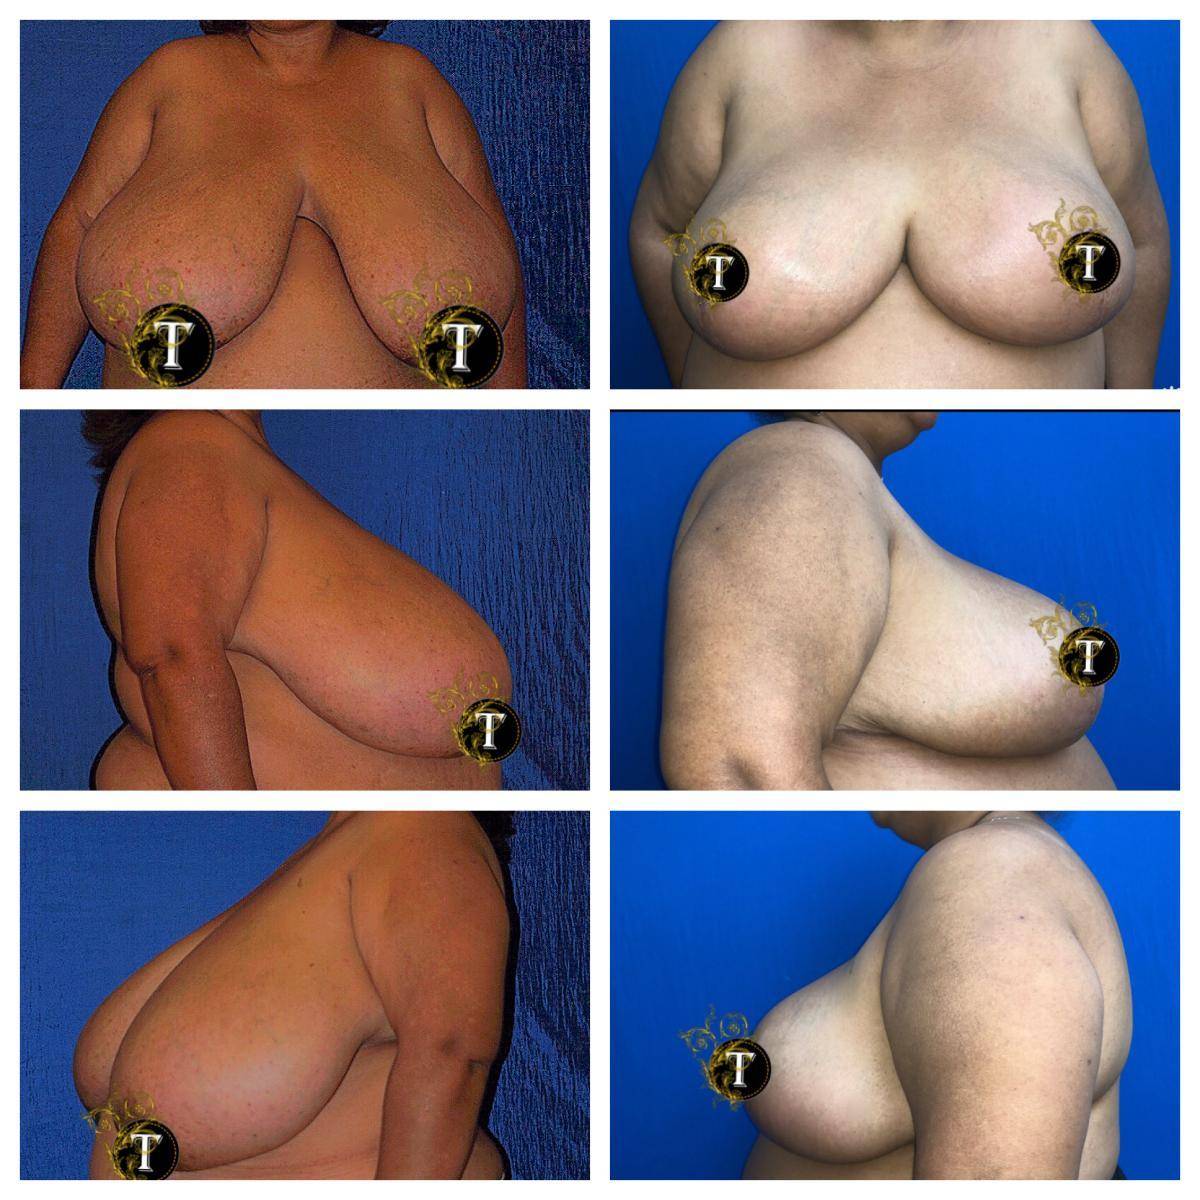 Breast-Reduction